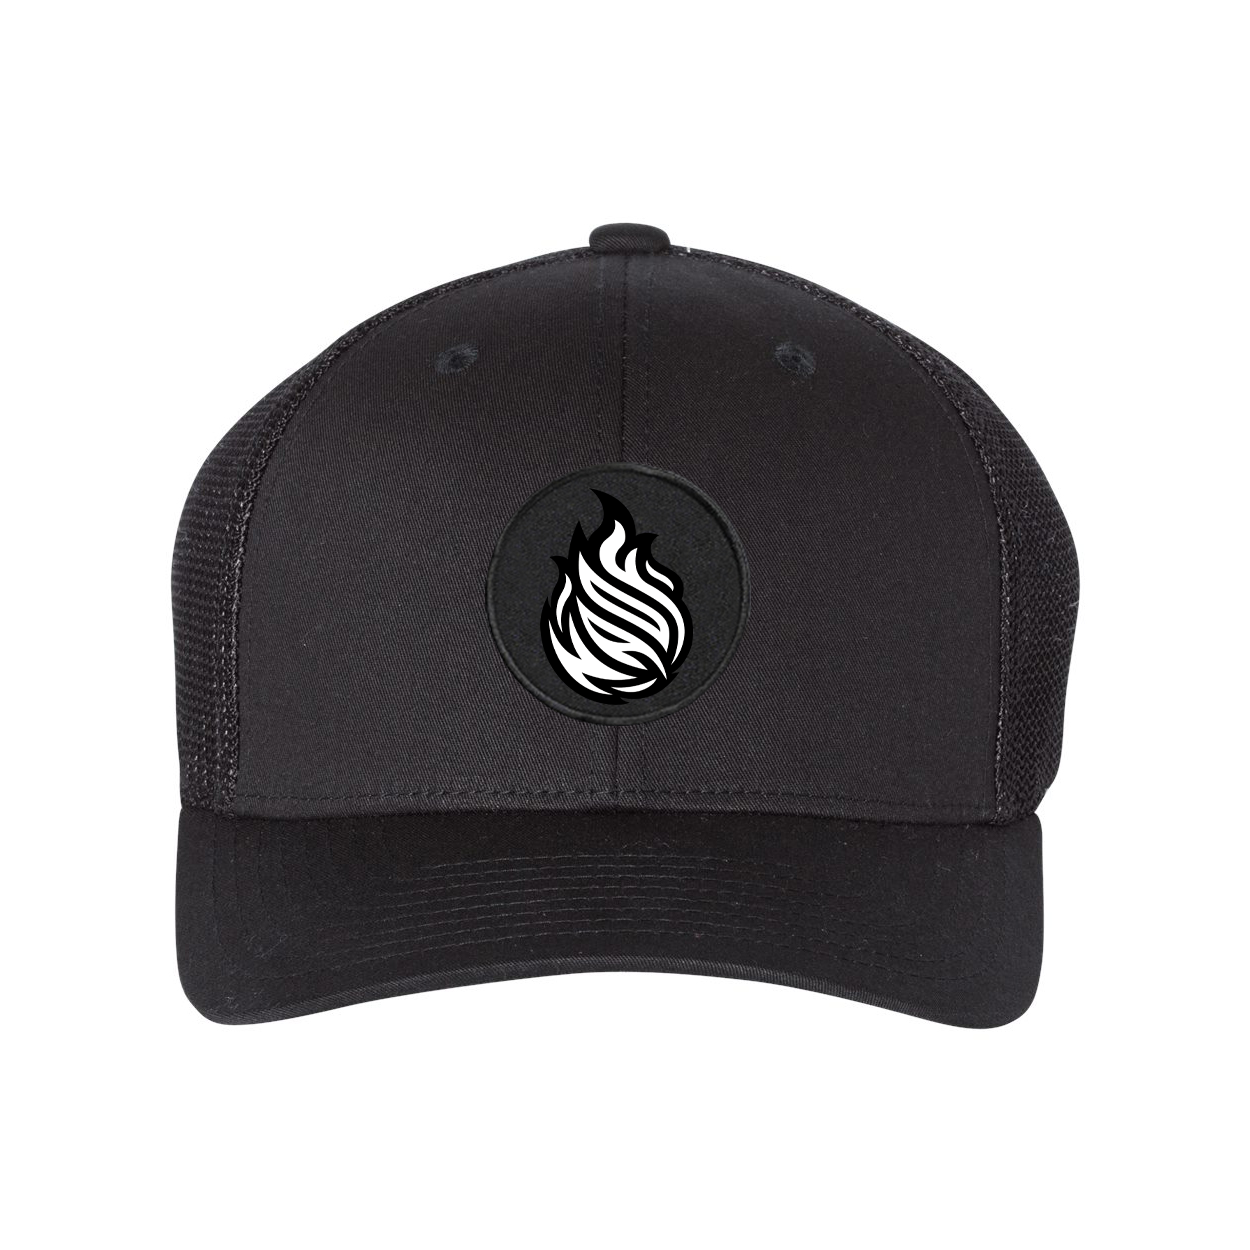 Near An Open Flame Classic Woven Circle Patch Snapback Trucker Hat Black